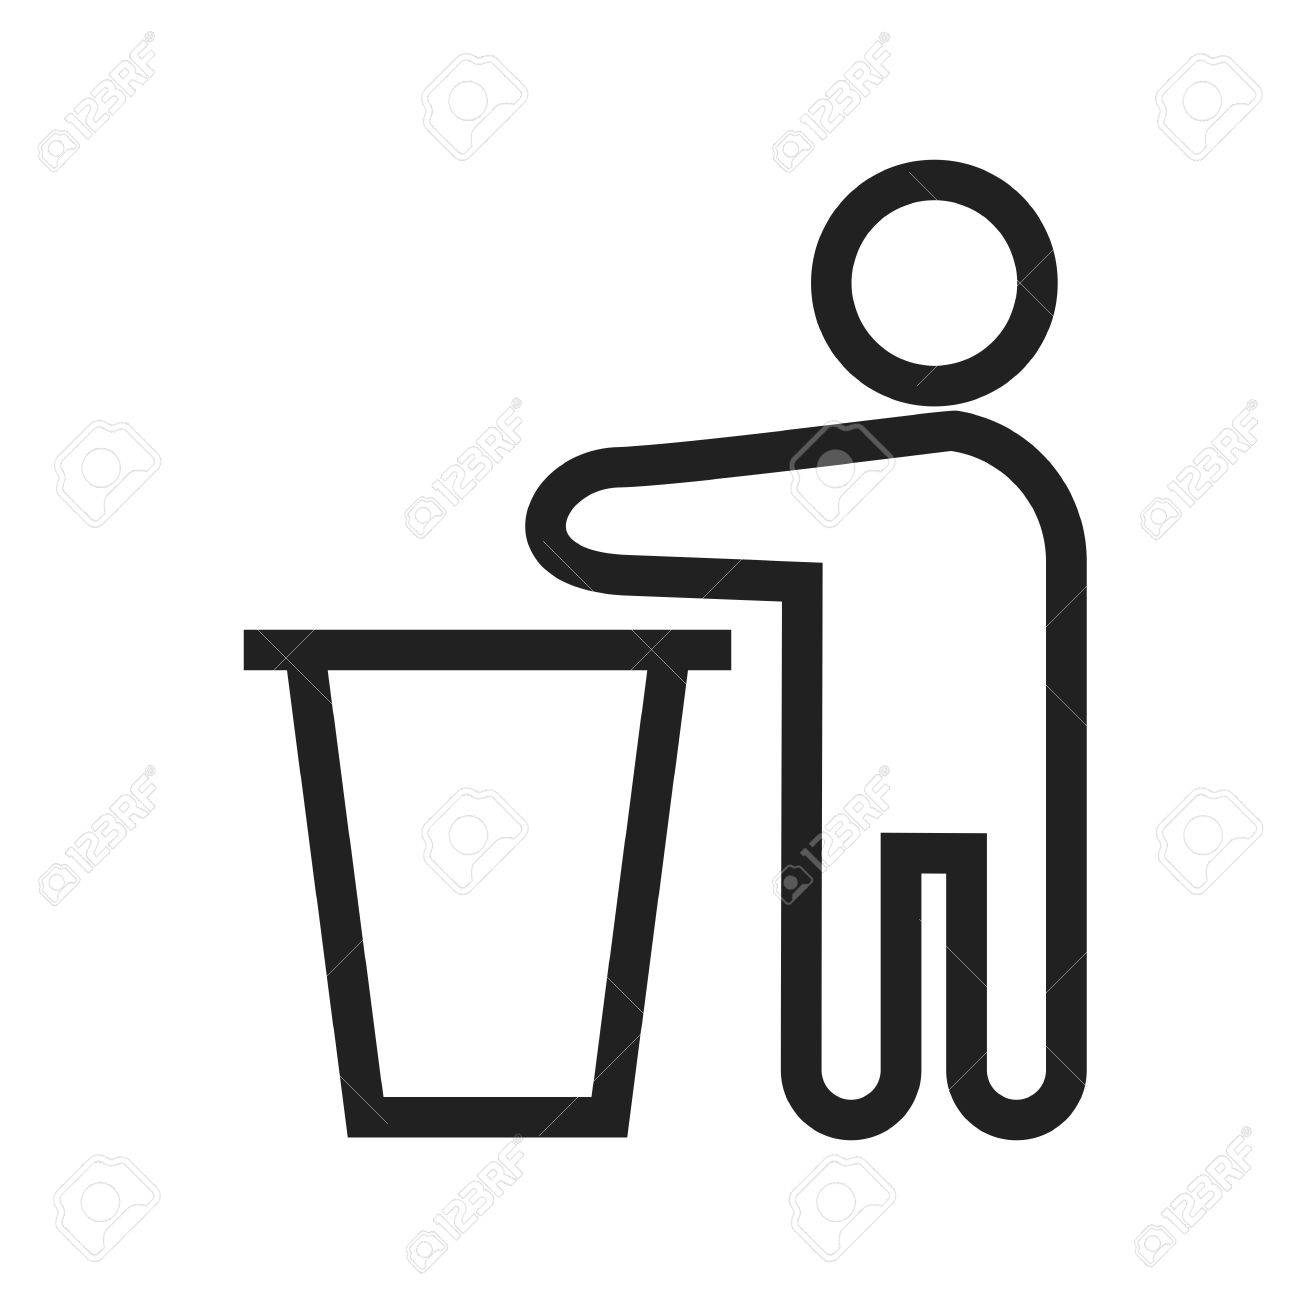 Garbage Icons set stock vector. Illustration of pollution - 35348204